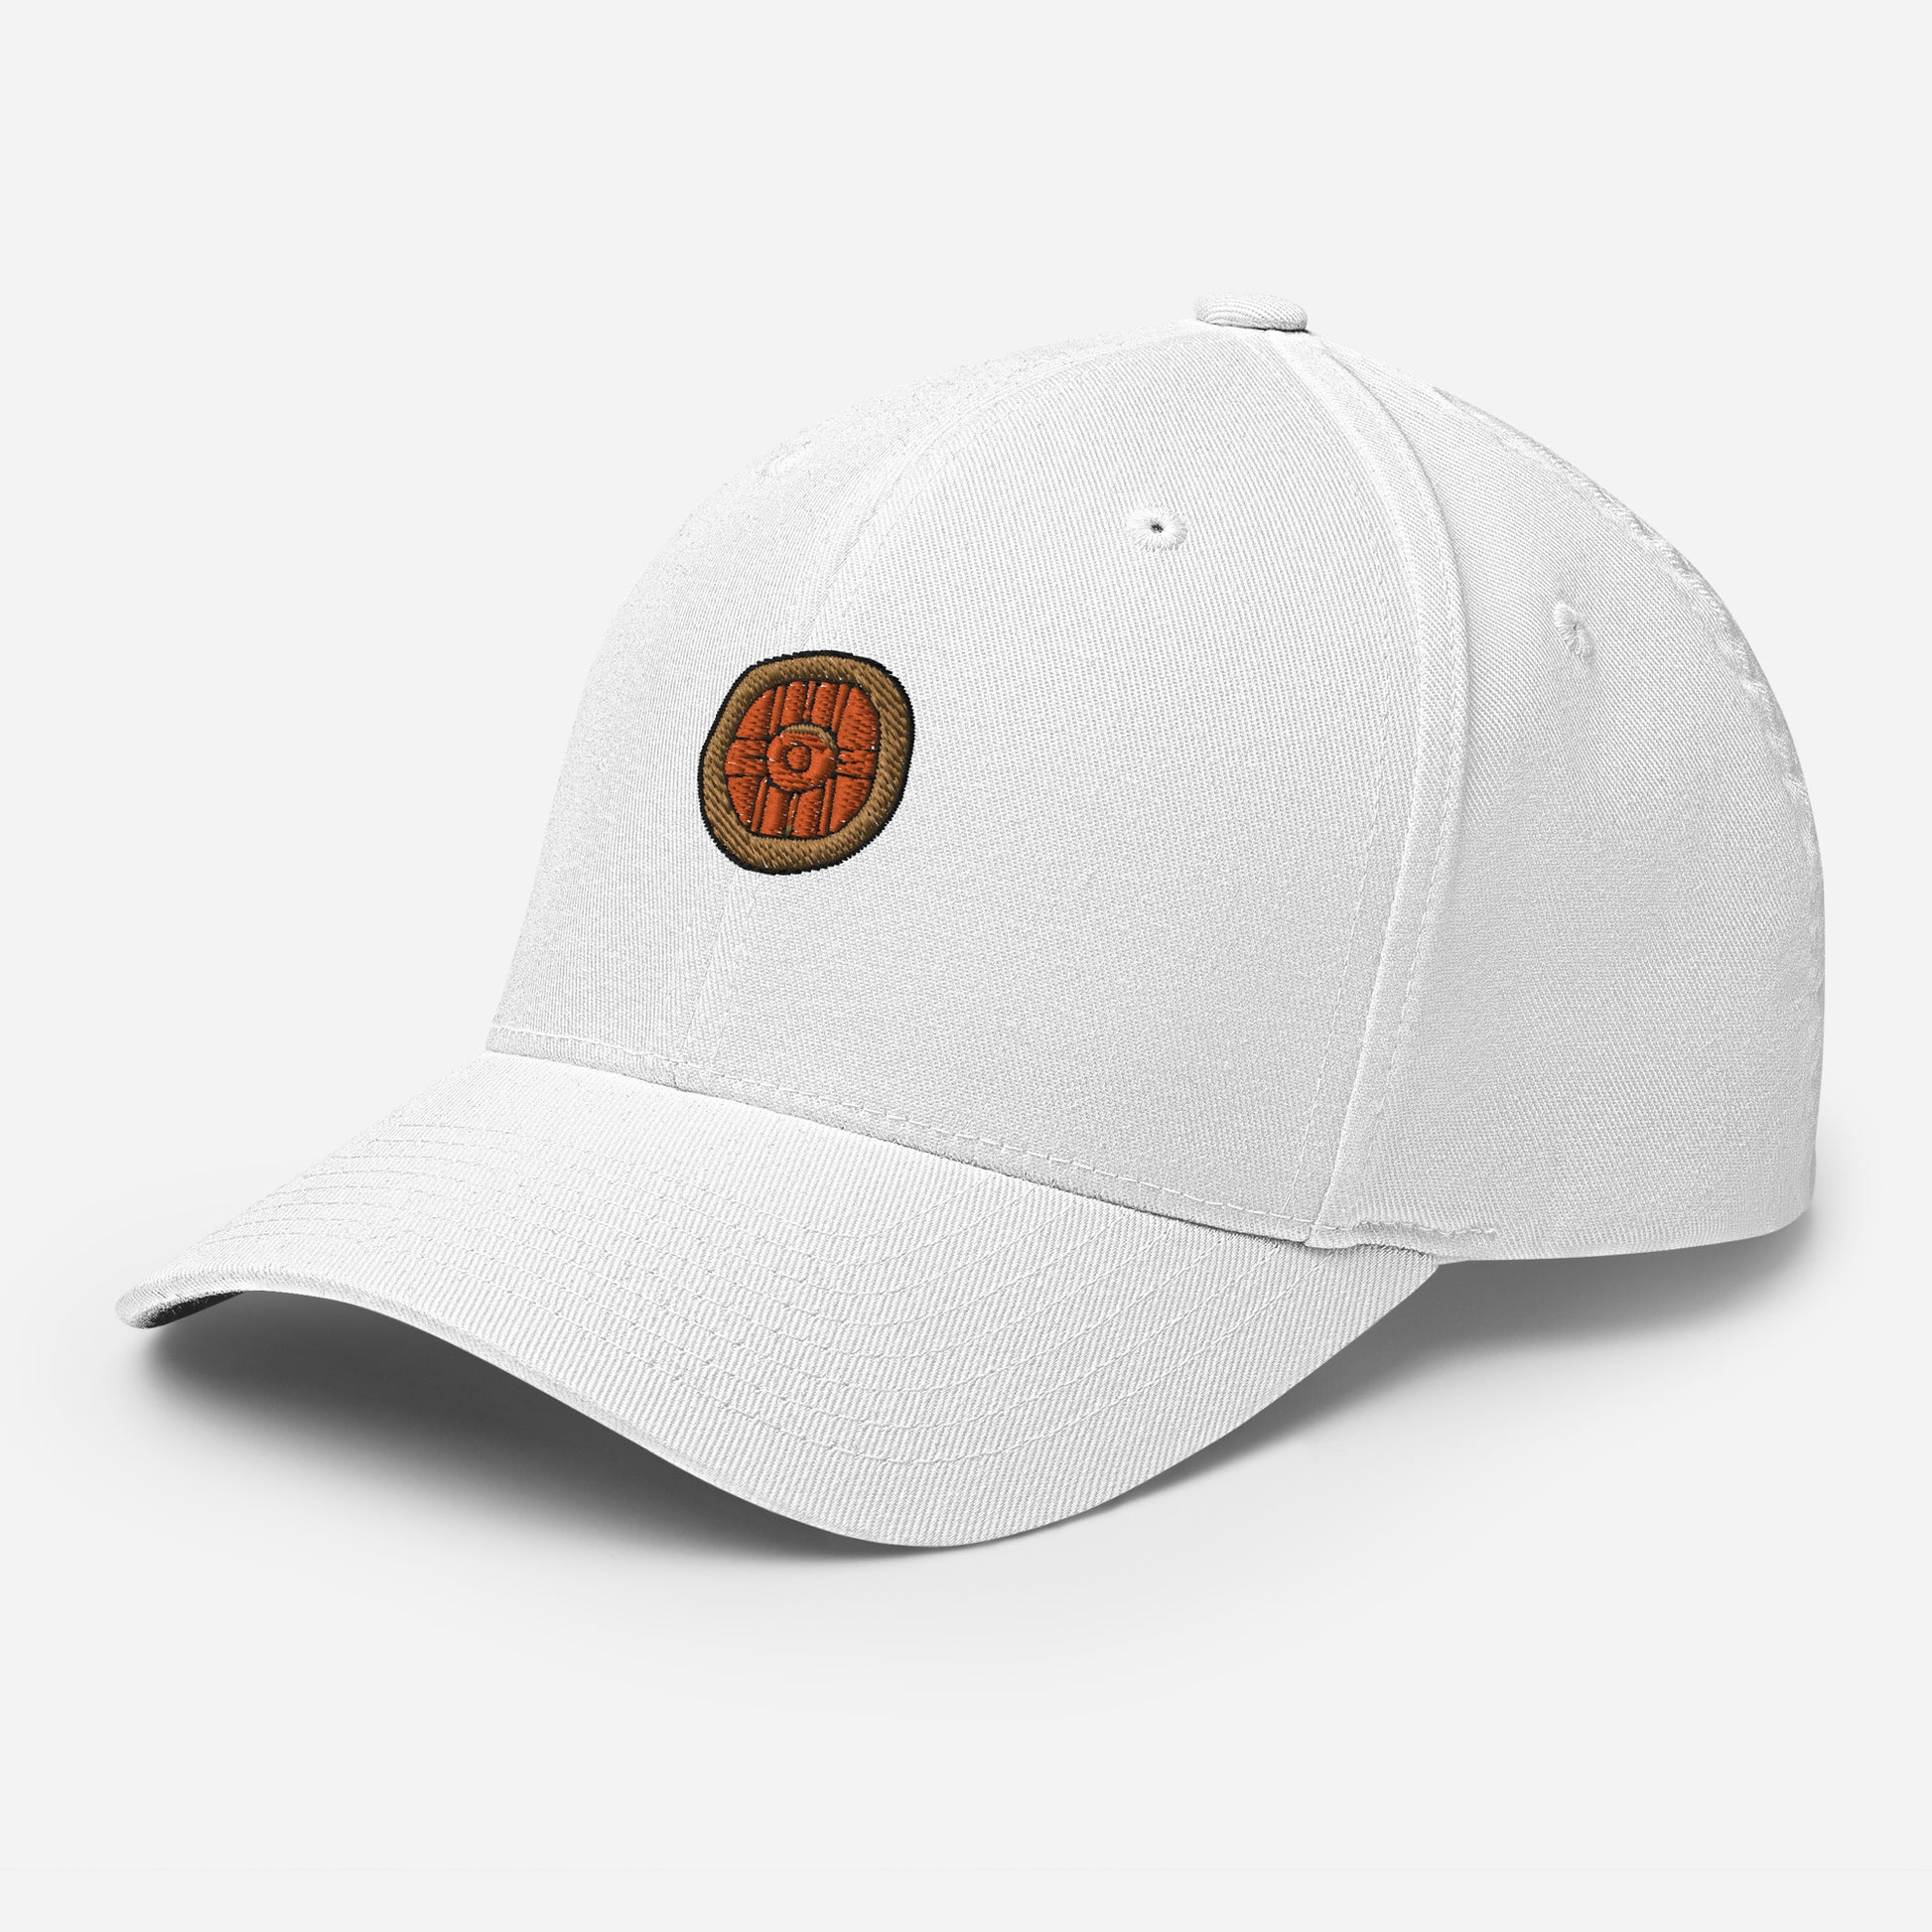 cap-from-the-front-with-fantasy-symbol